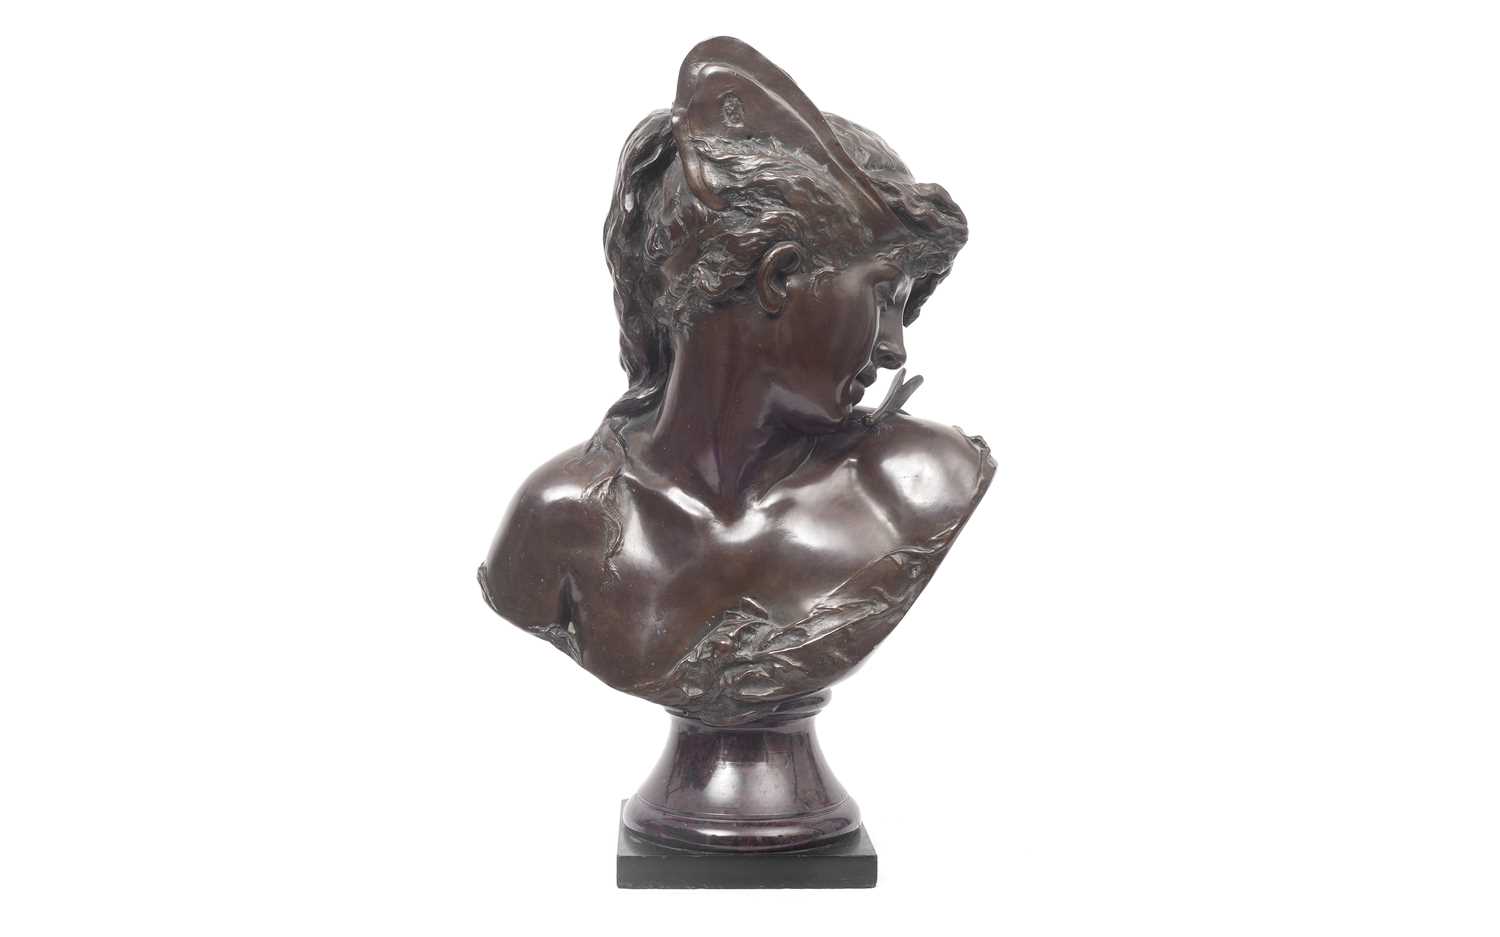 HELENE BERTAUX (FRENCH, 1825-1909): A BRONZE BUST OF A GIRL WITH DRAGON FLY